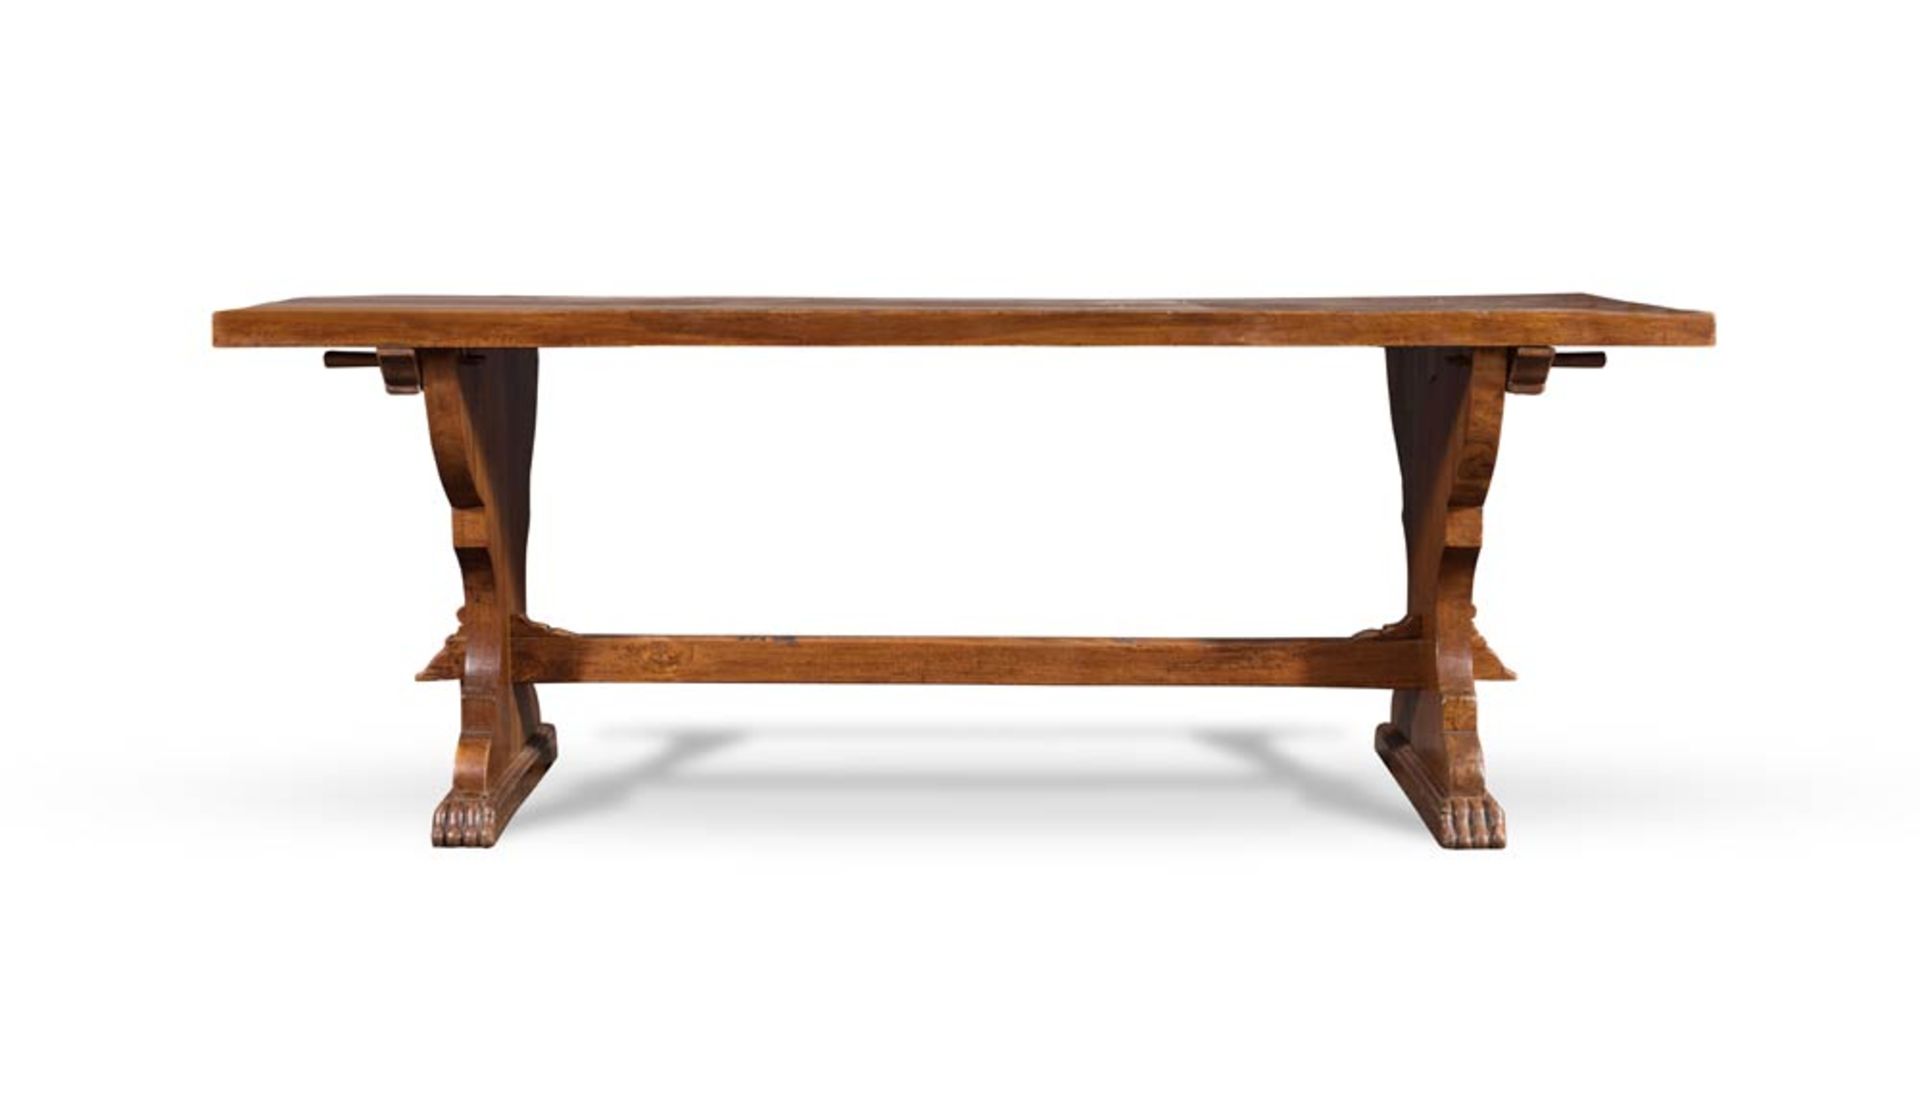 Walnut table, 20th Century, made by ancient elements.